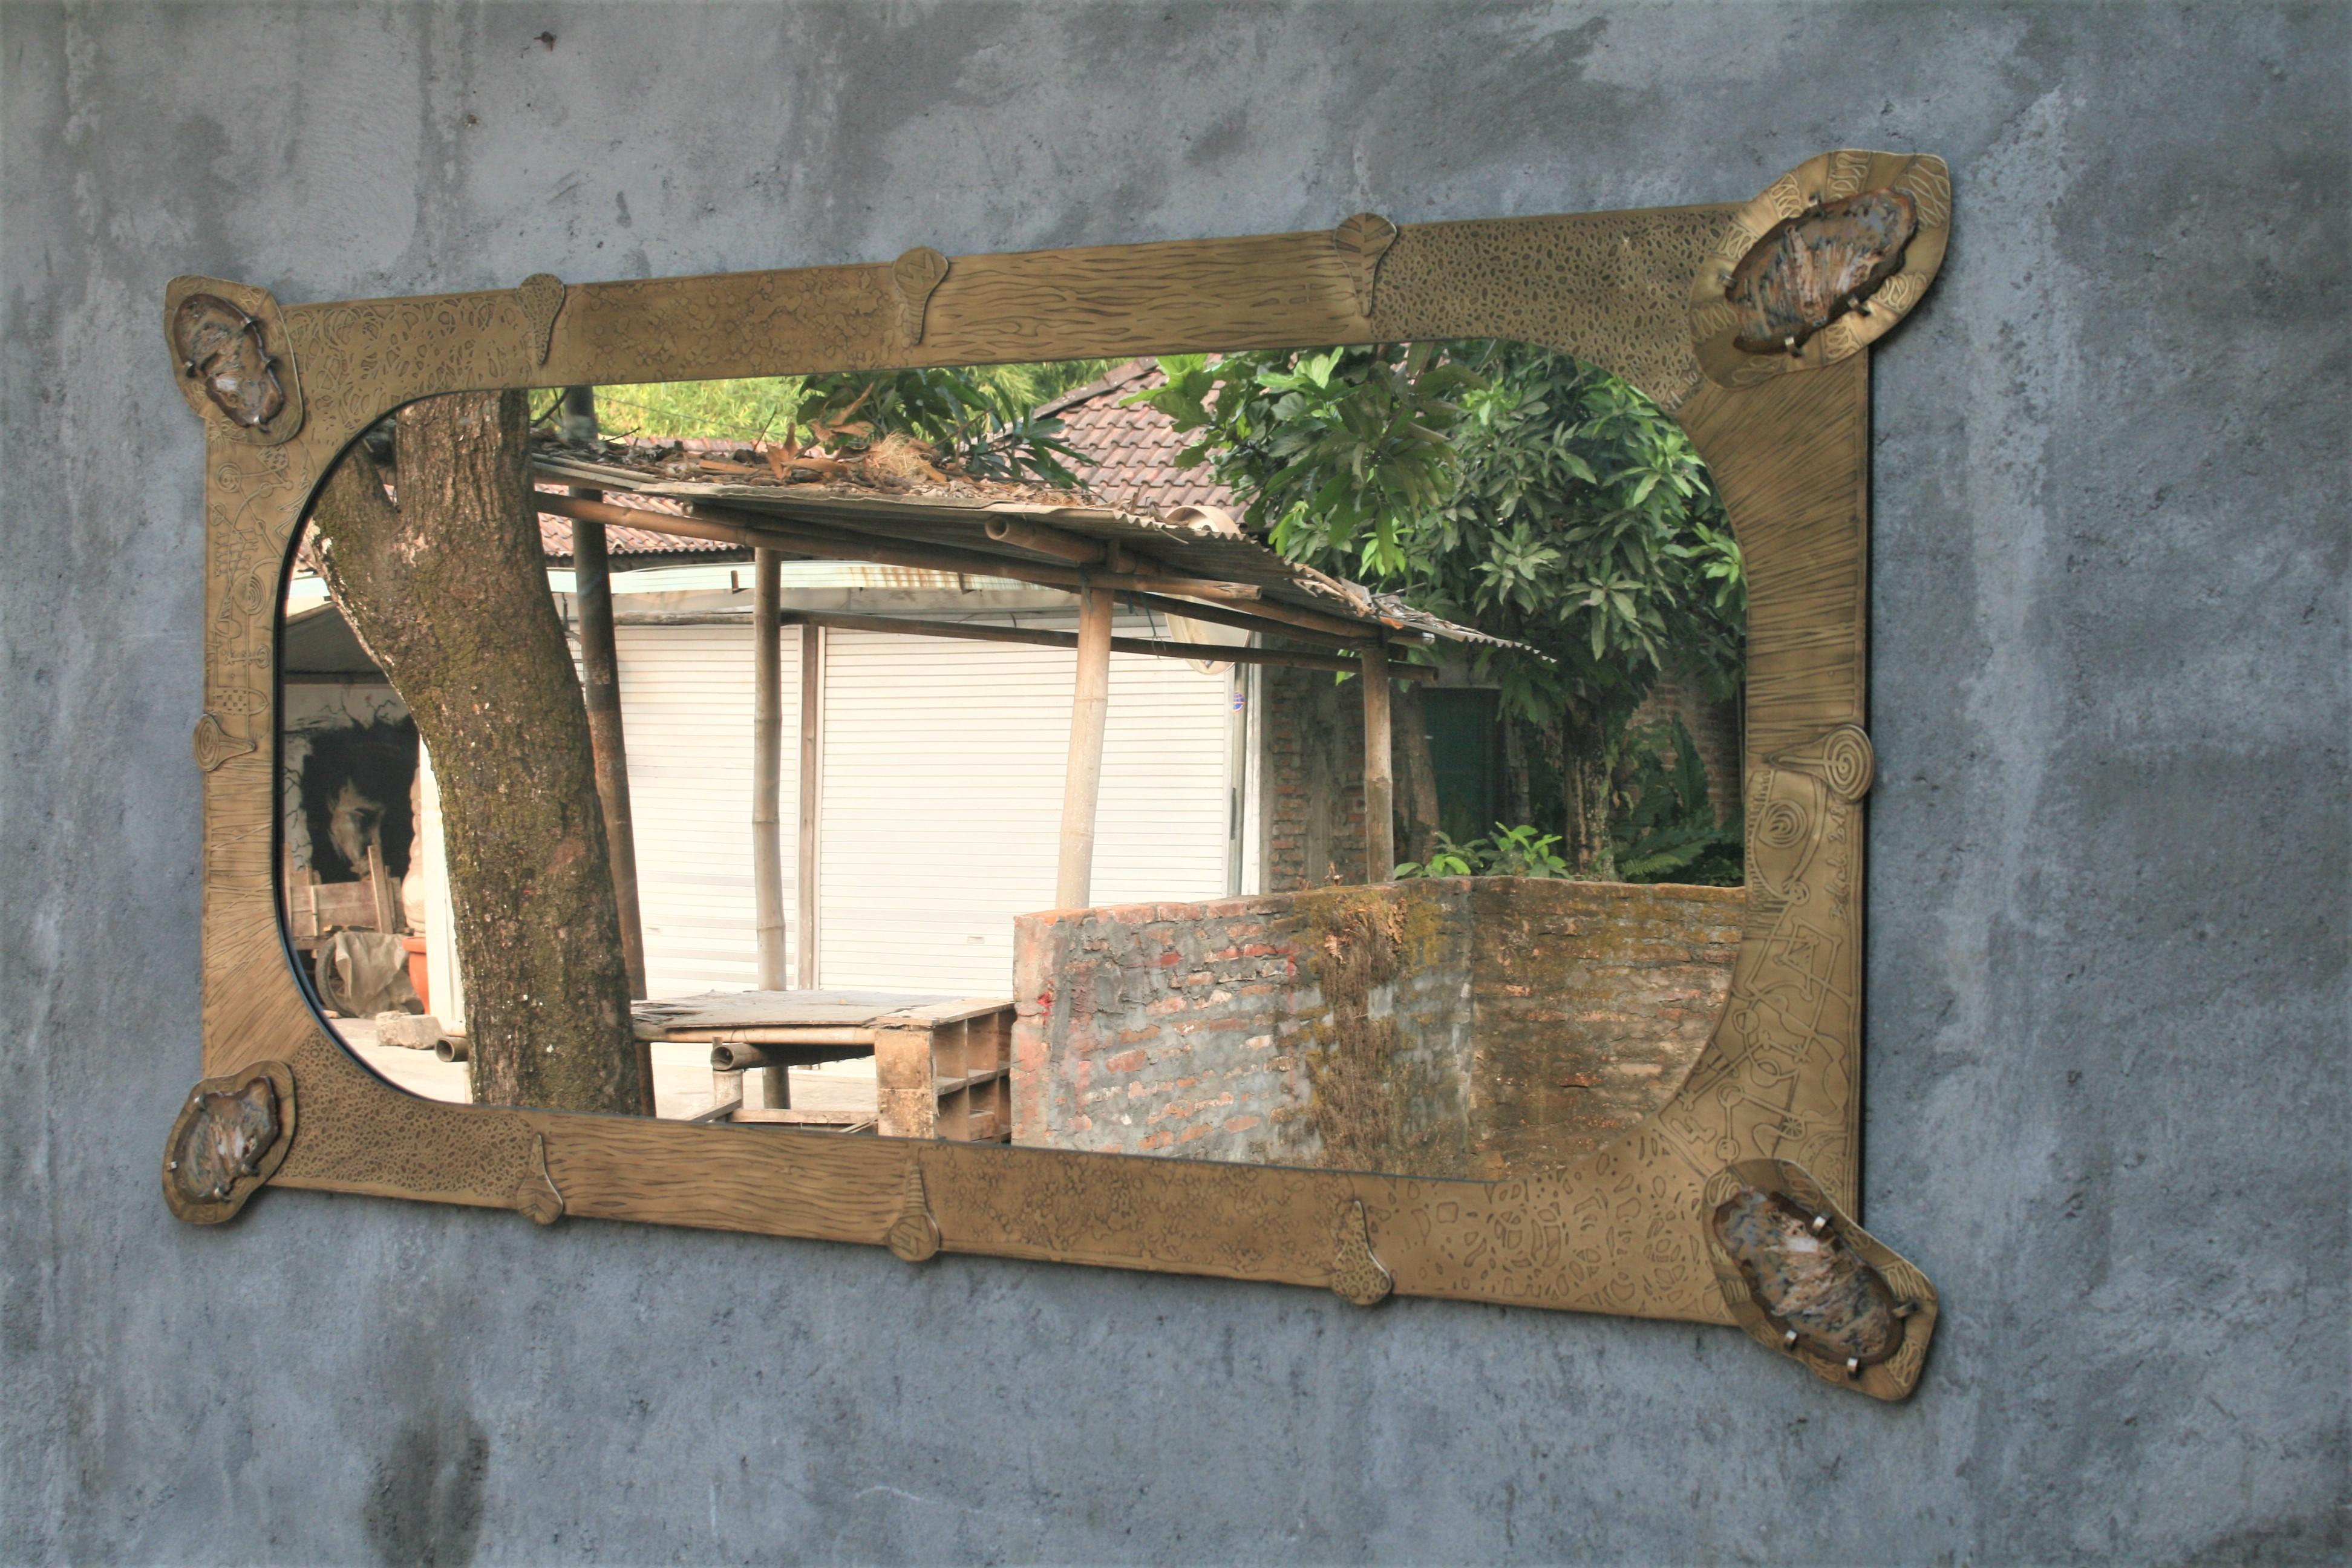 Unique wall mirror by Studio Belgali, handmade acid etched brass - black patinated, bejeweled with agate stone slices that come from the same mineral. Can be hang horizontally and vertically. 

Stunning piece of art by Studio Belgali. Custom made